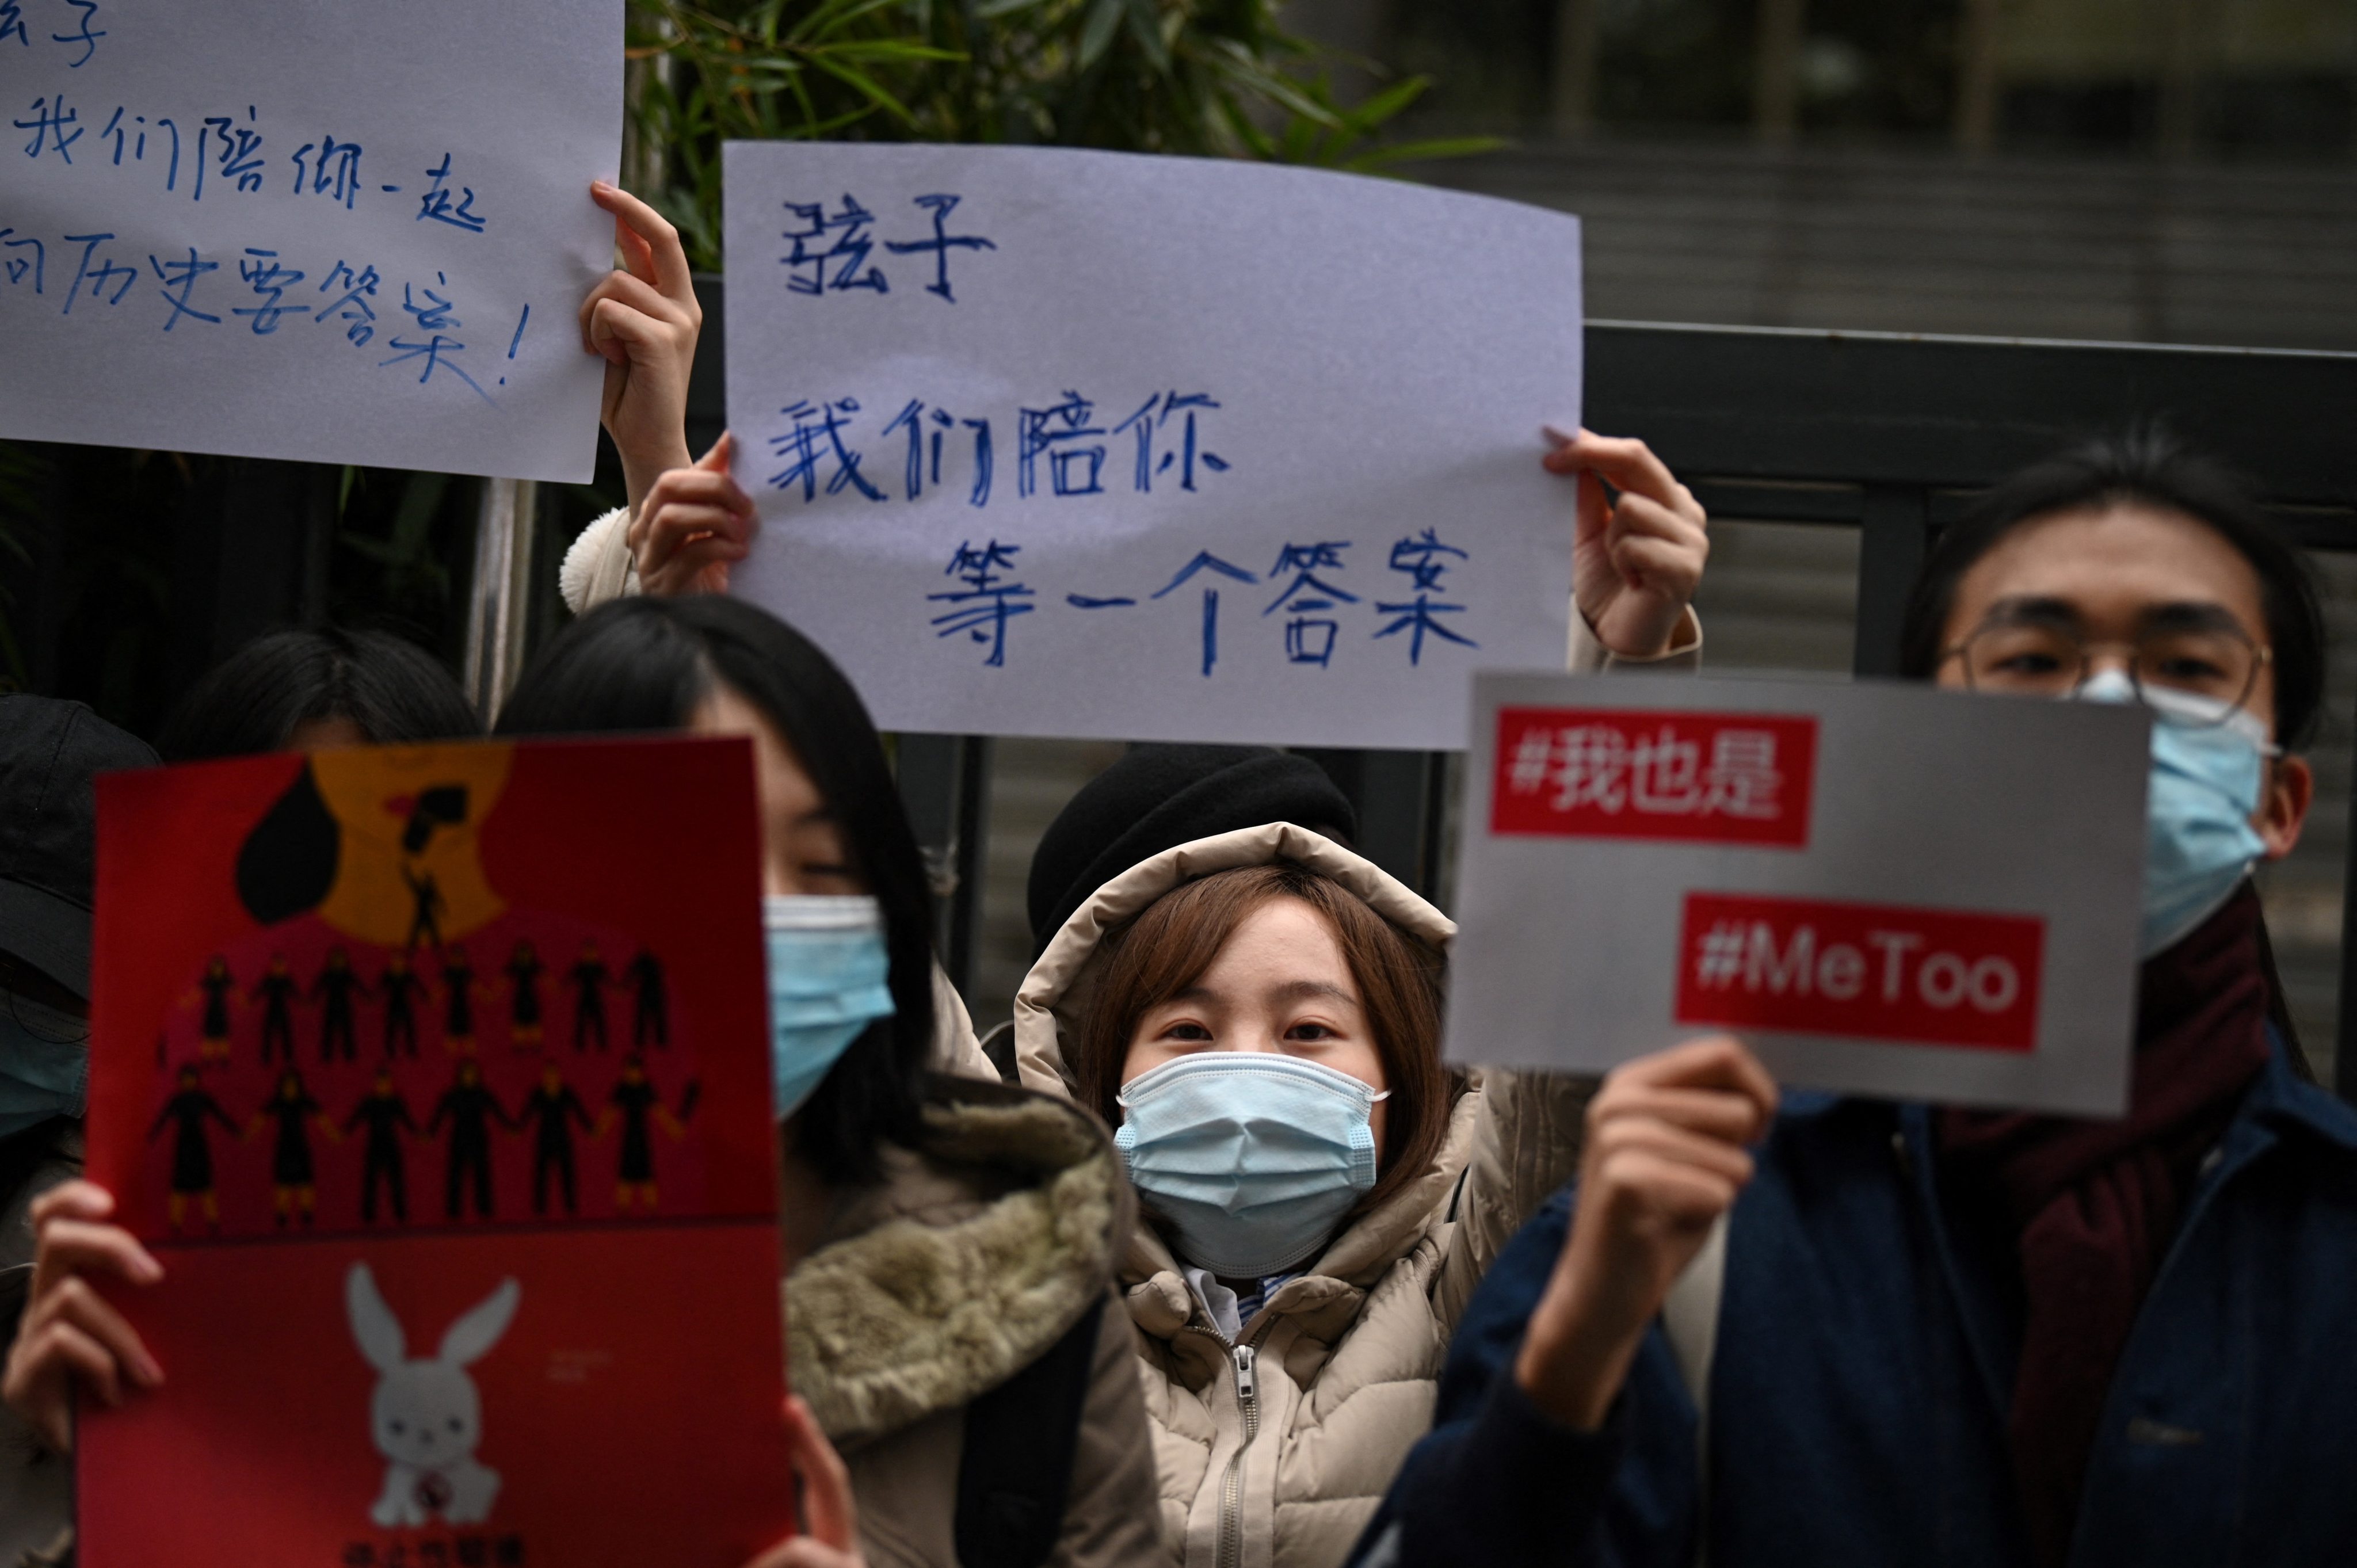 Supporters of screenwriter Zhou Xiaoxuan, who is popularly known by her pen name Xianzi, hold placards that say “#MeToo” and “Xianzi, we will wait with you for an answer” outside the Haidian People’s Court in Beijing on December 2, 2020. Although there has been legal progress on women’s rights in China, Zhou lost her landmark sexual harassment case against popular TV host Zhu Jun. Photo: AFP